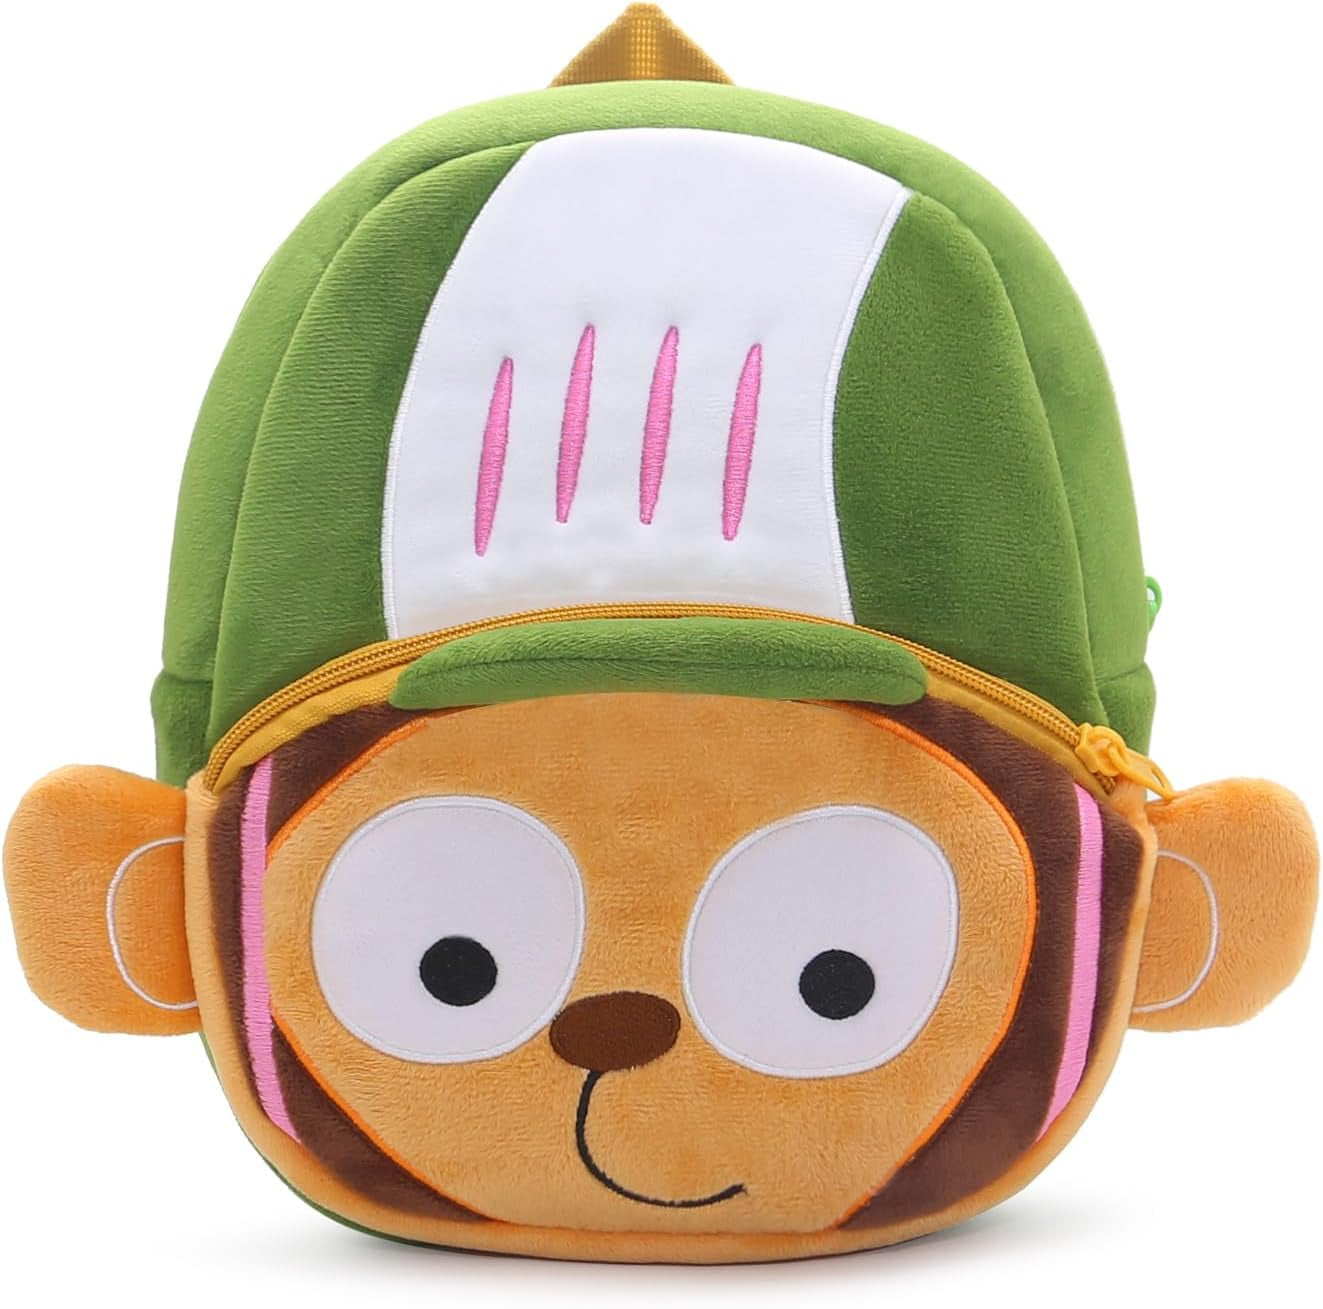 Toddler Backpack for Boys and Girls, Cute Soft Plush Animal Cartoon Mini Backpack Little for Kids 2-6 Years (Monkey Cute)